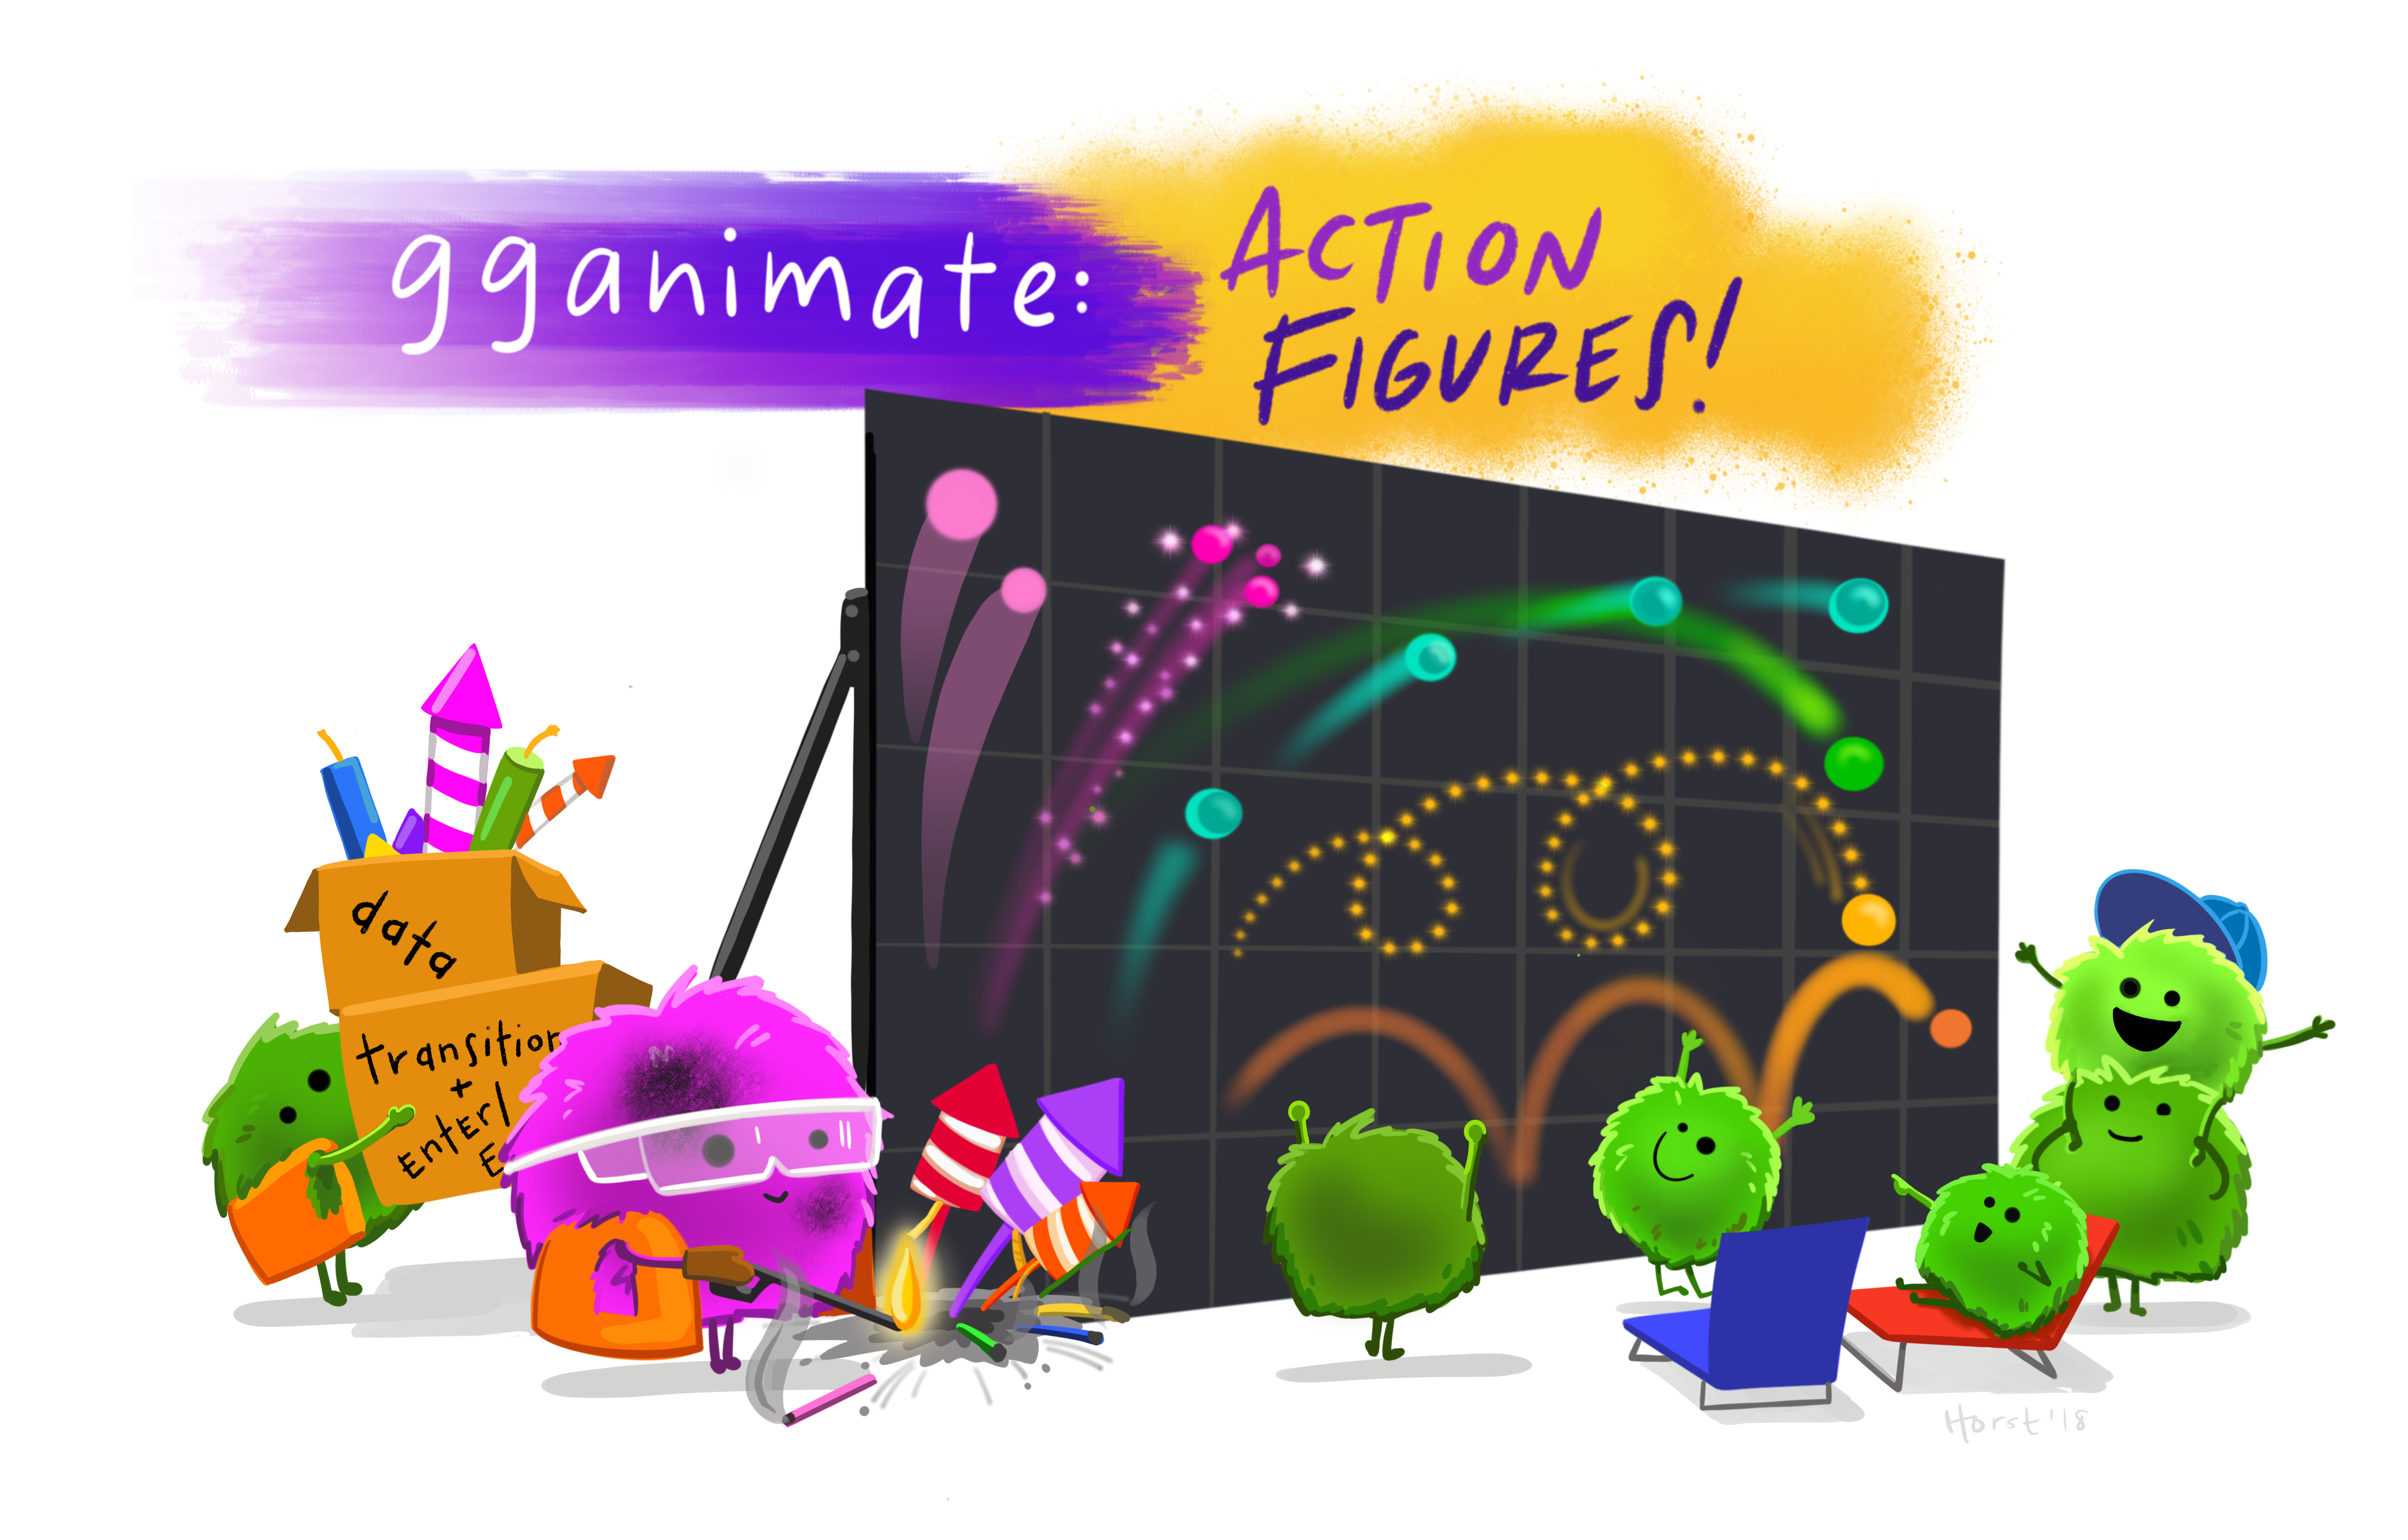 an illustration including fireworks showing an application og gganimate to make action plots, also including cute monsters